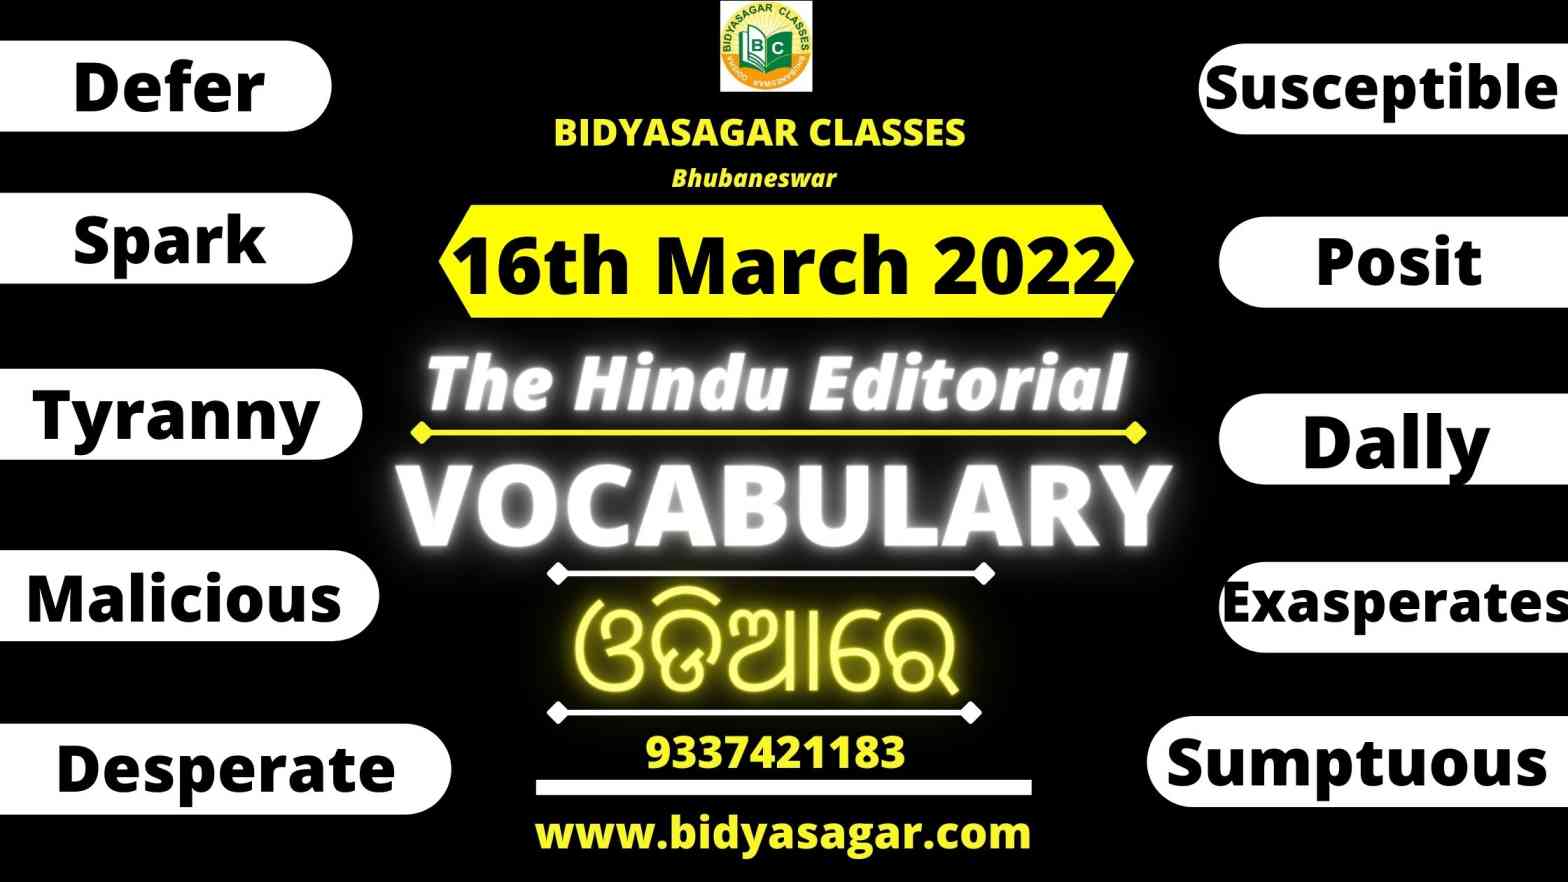 The Hindu Editorial Vocabulary of 16th March 2022